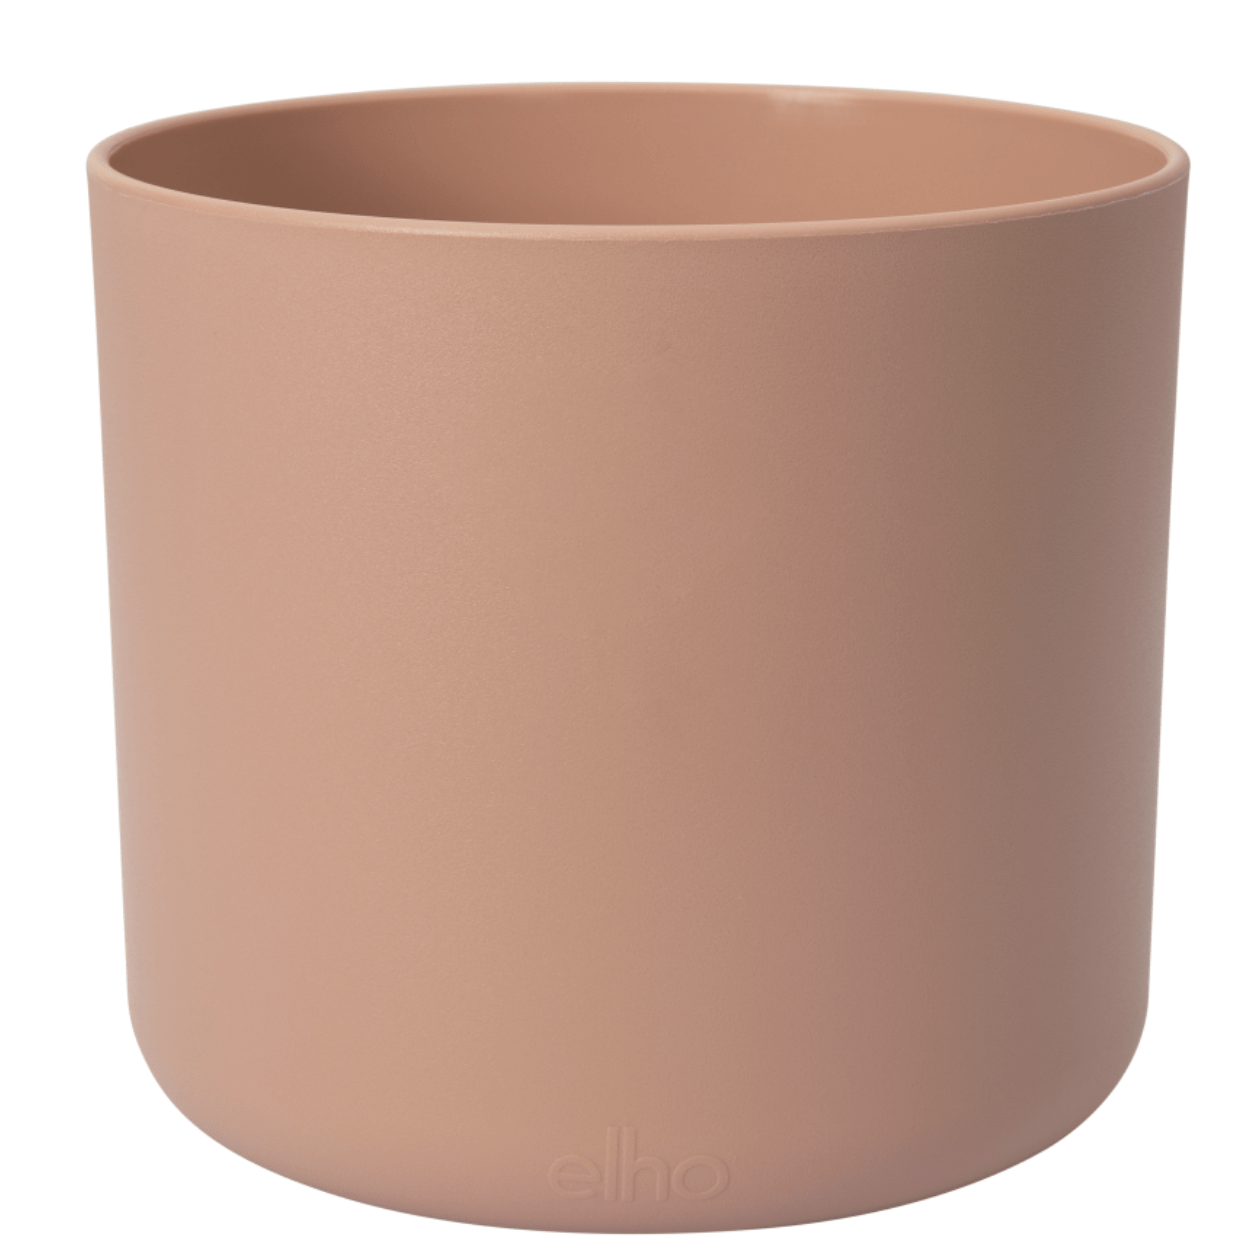 Elho Plant Pots 16cm / Delicate Pink Recycled Plastic Plant Pot -  'b.for soft round' in Delicate Pink